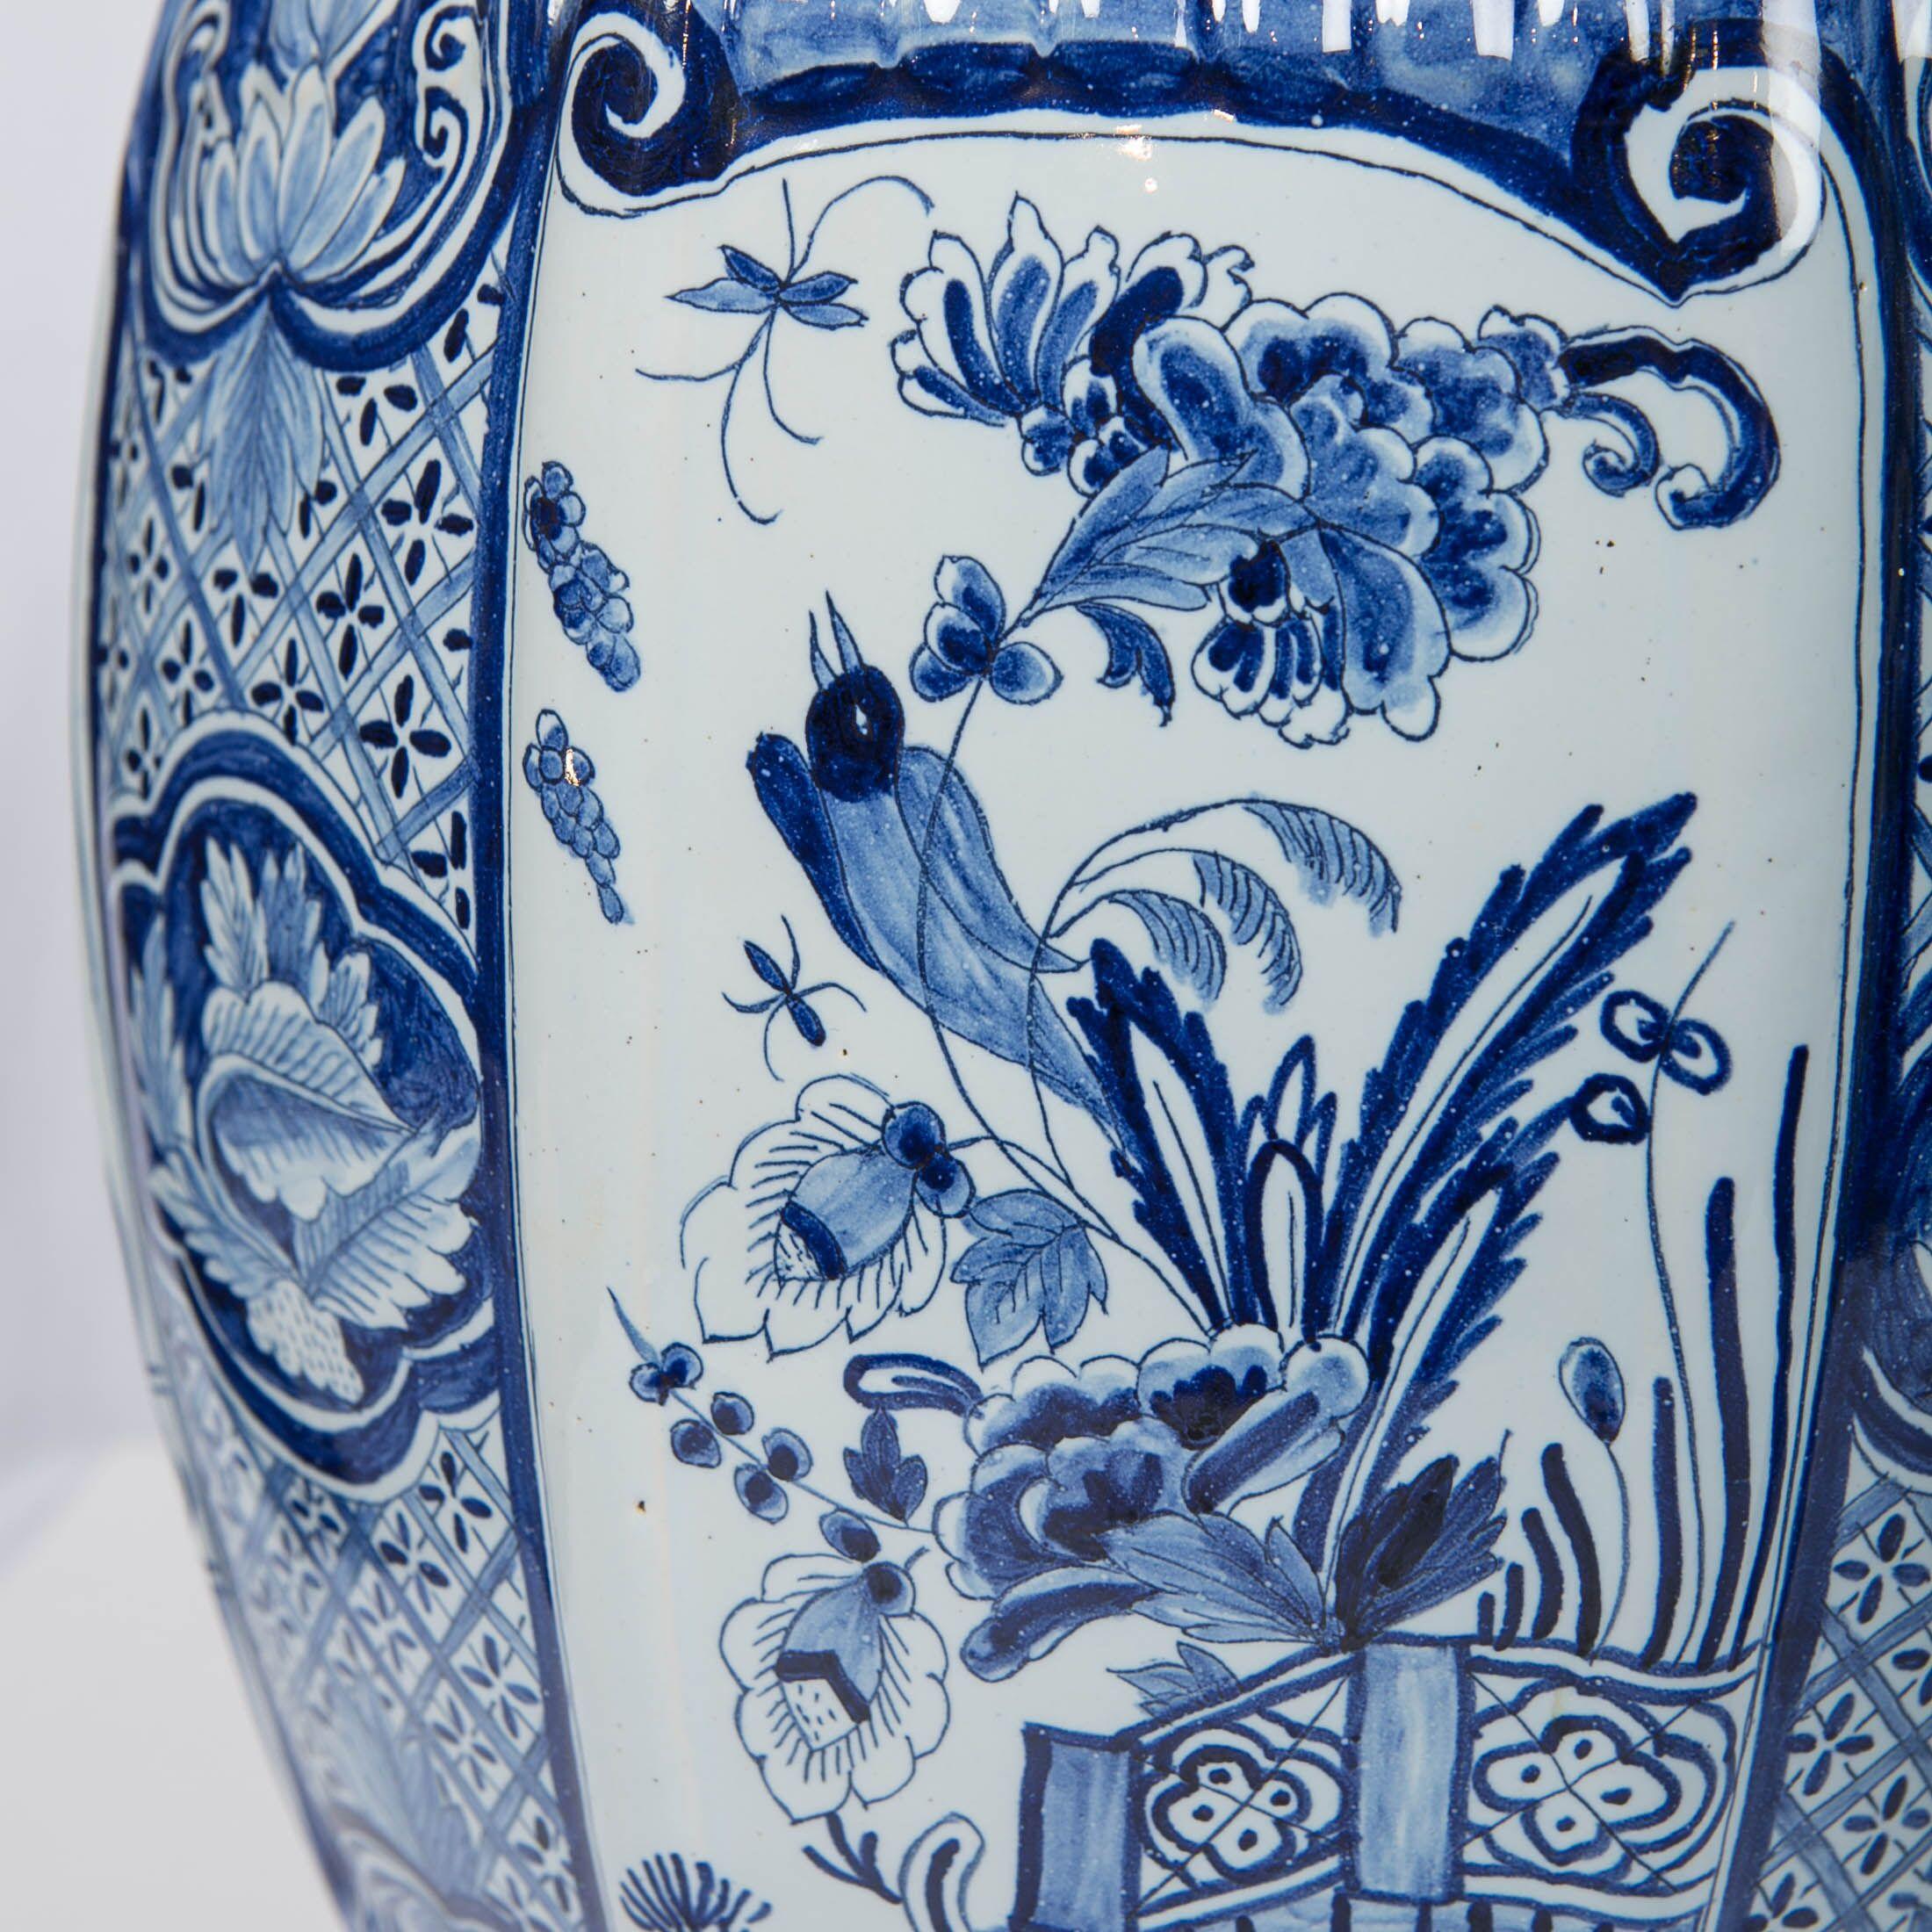 We are pleased to offer this large and beautiful pair of Dutch Delft Blue and White ginger jars. They are decorated with traditional Delft designs, and the jars are molded in a traditional Delft octagonal shape with a fluted surface. The fluting